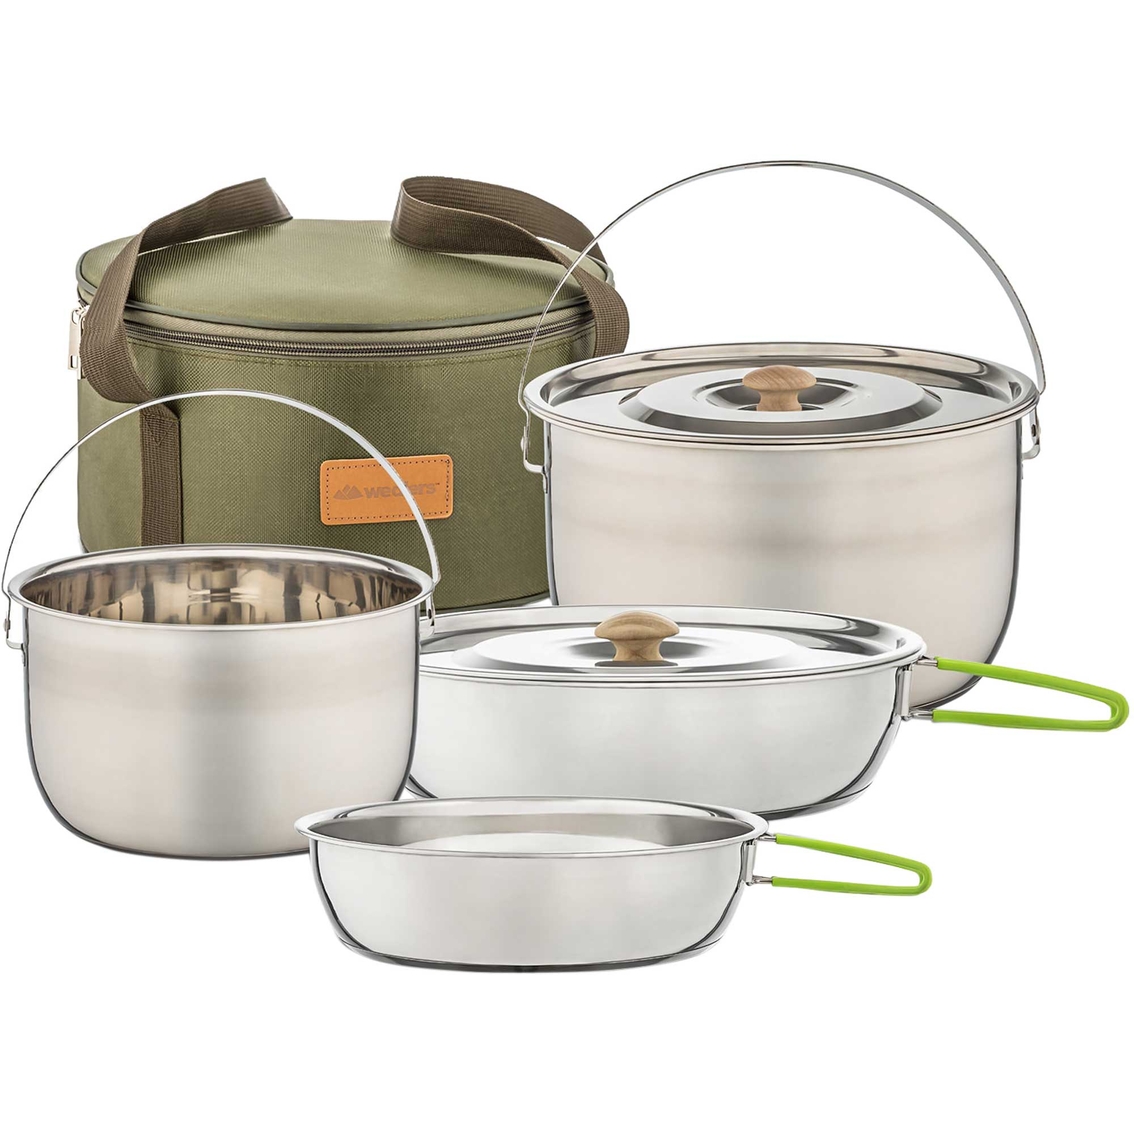 Wealers Camping Pots And Pans Cookware Set 4 Pc. With Brown Bag